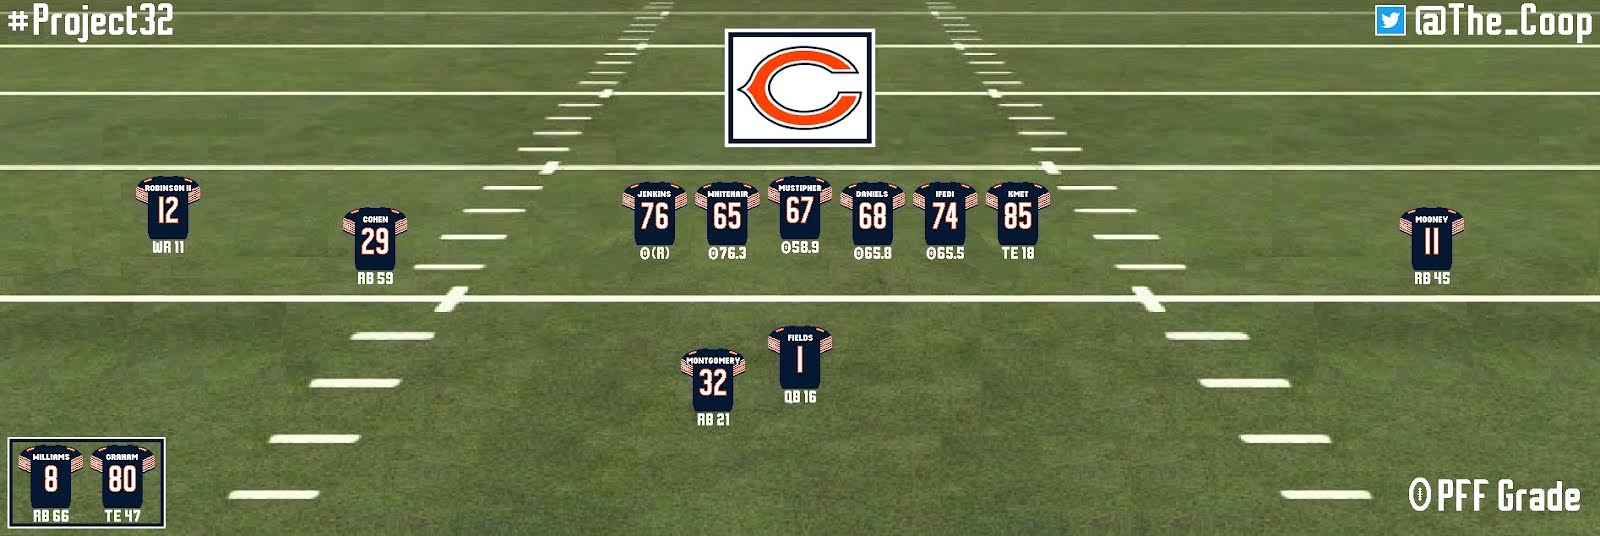 Chicago Bears 2021 projections